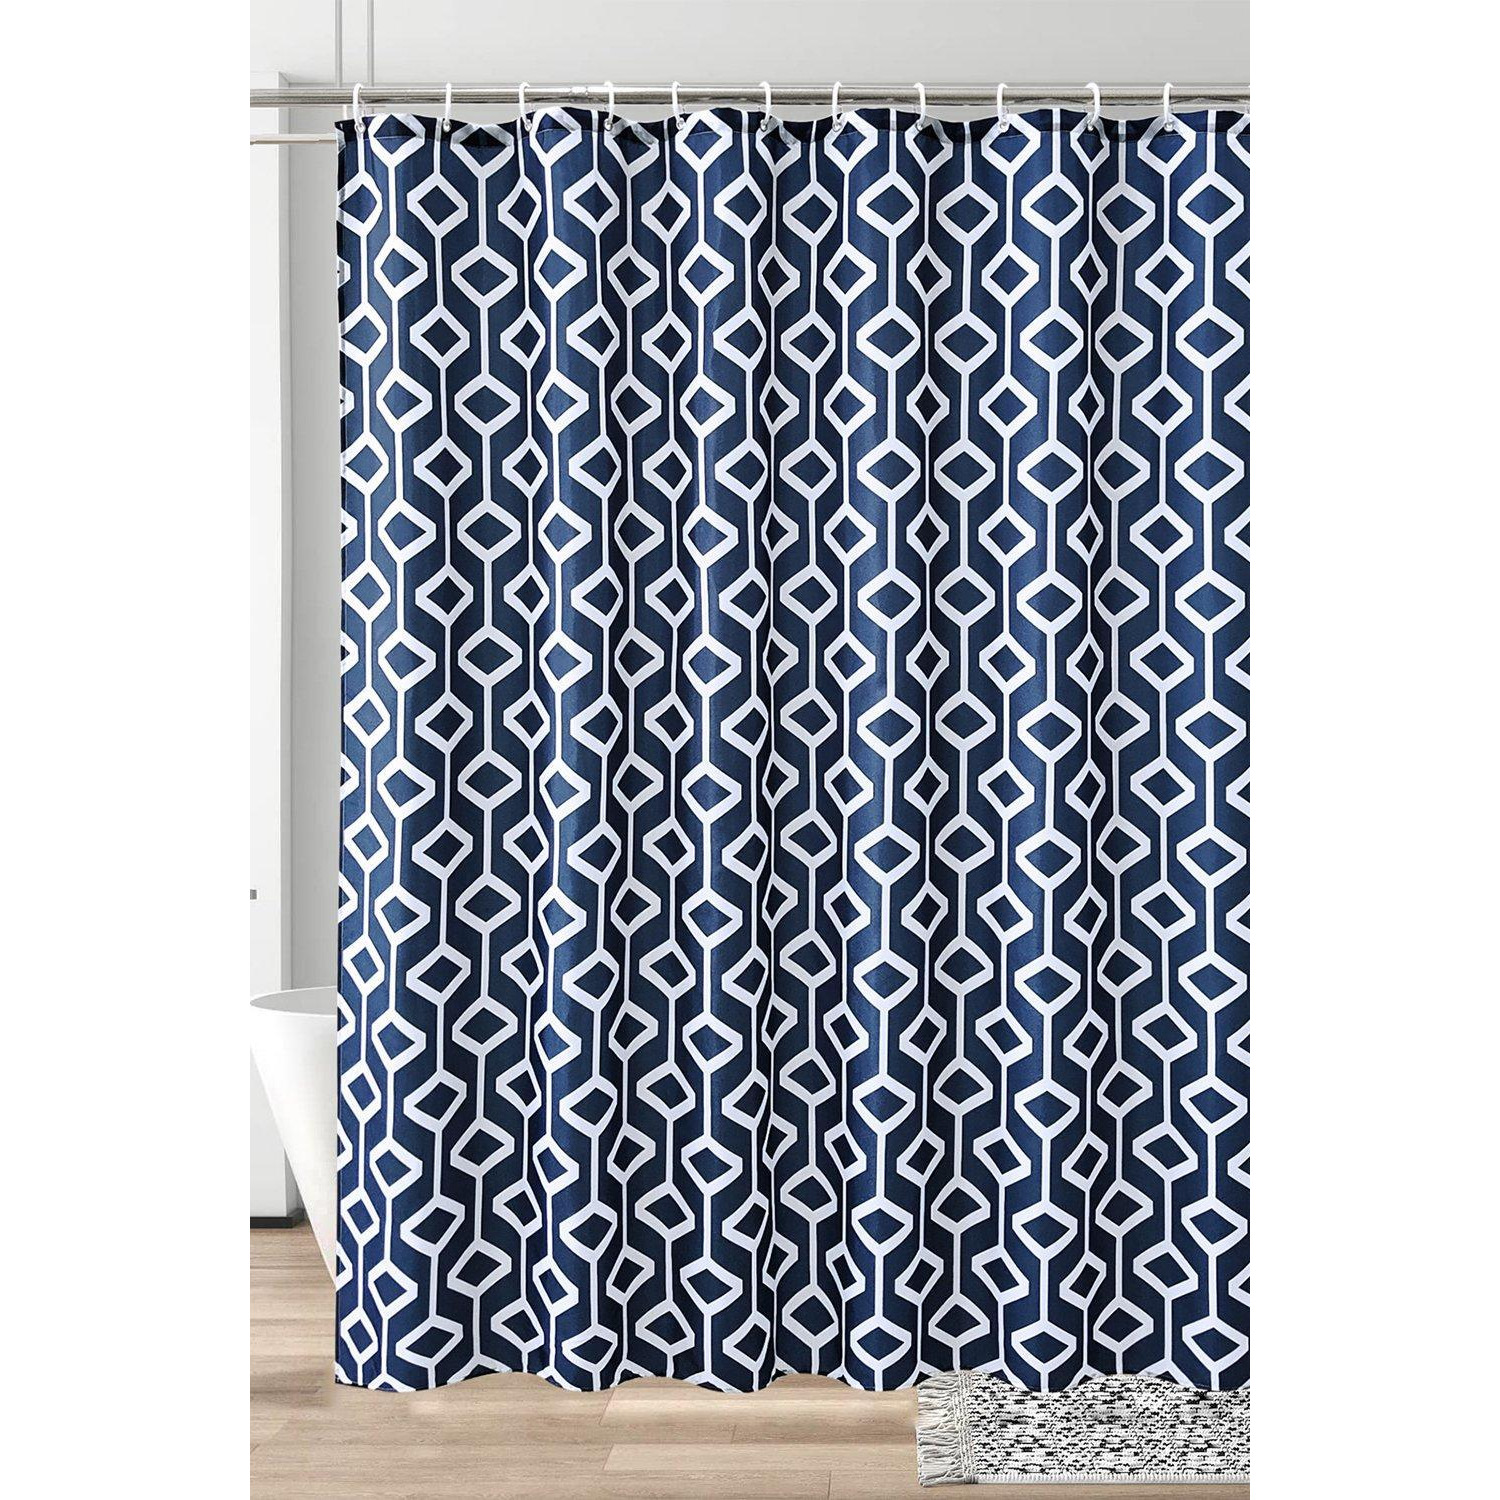 Abstract Geometic Shower Curtain, Navy Blue - 180cm x 180cm - image 1